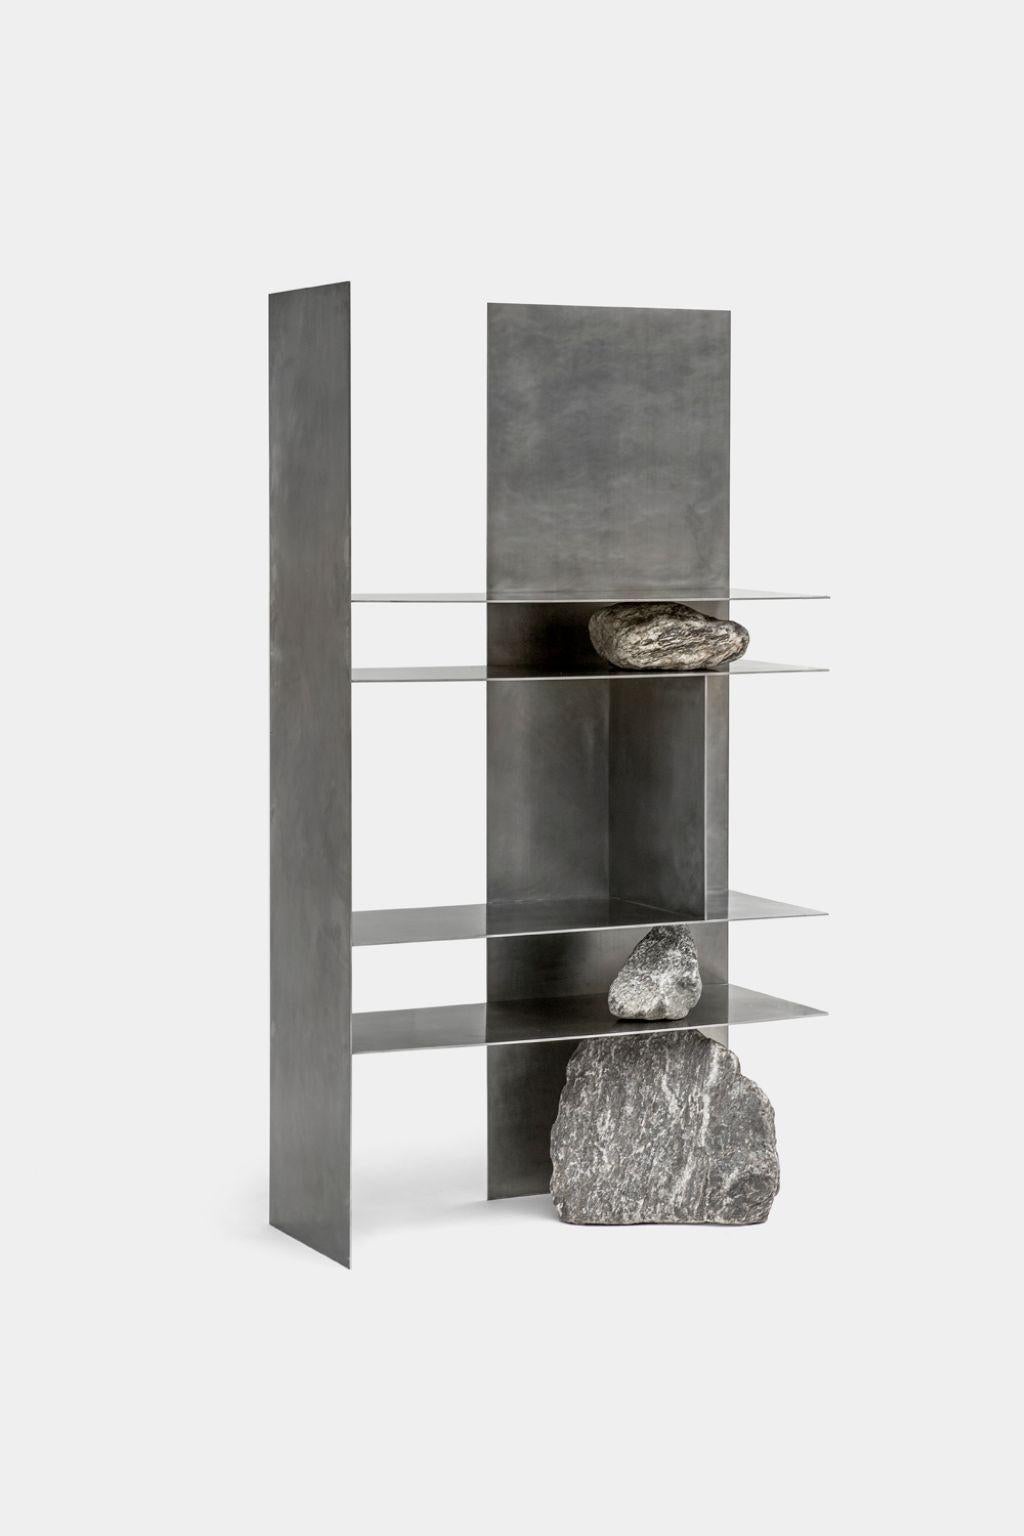 Proportions of Stone Shelf 03 by Lee Sisan
Dimensions: W 120 x D 40 x H 200 cm
Materials: Stainless steel, natural stone

Each piece is made to order and uses natural stones, so please expect some variability in design.

